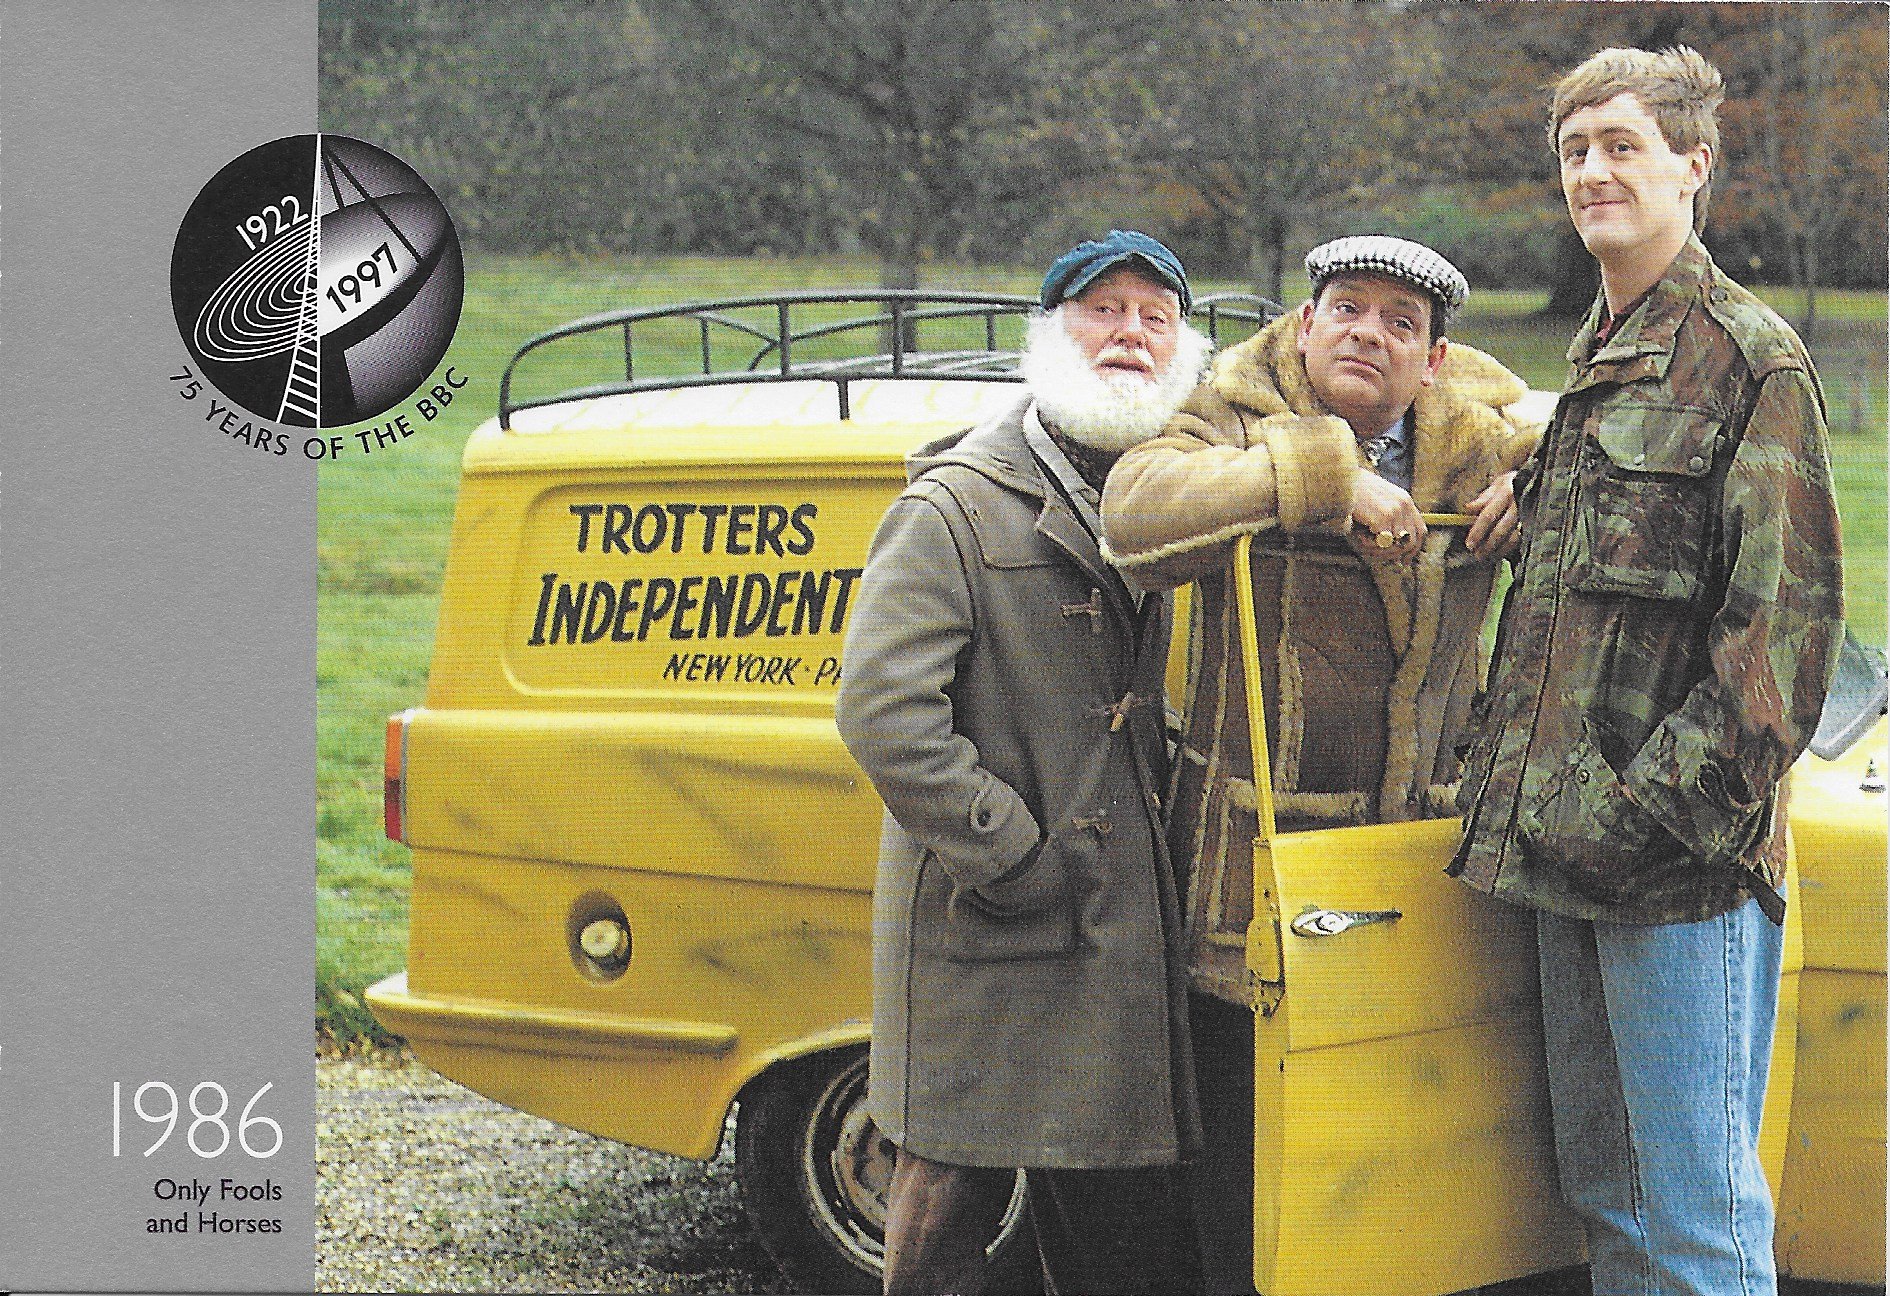 Picture of PC-BBC75-1986 75 years of the BBC - Only fools and horses by artist Unknown from the BBC postcards - Records and Tapes library